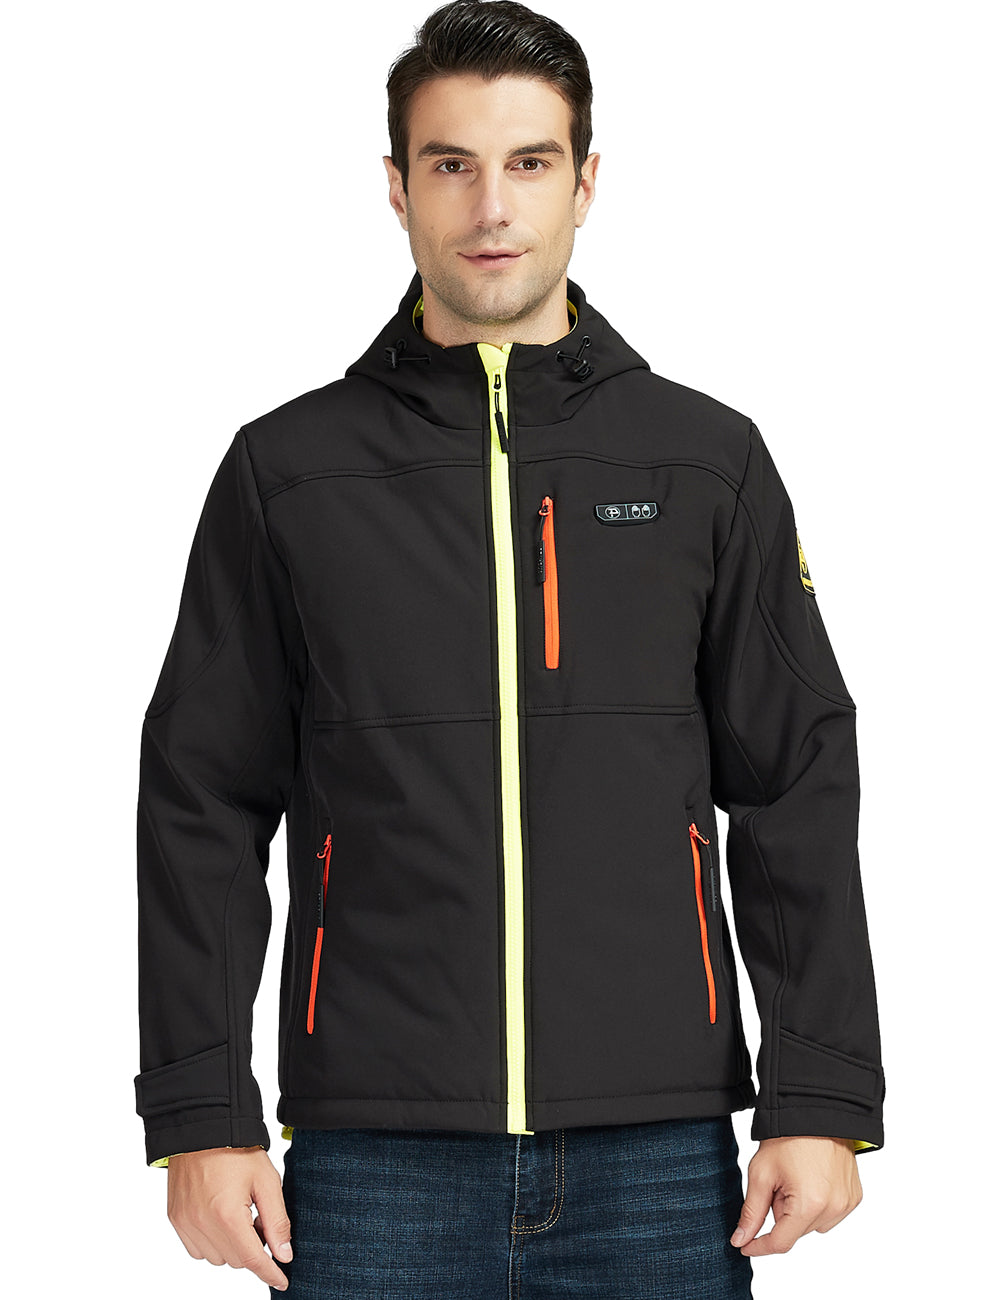 Mens 5 Zone Heated Jacket with Hood with Battery Kit-10